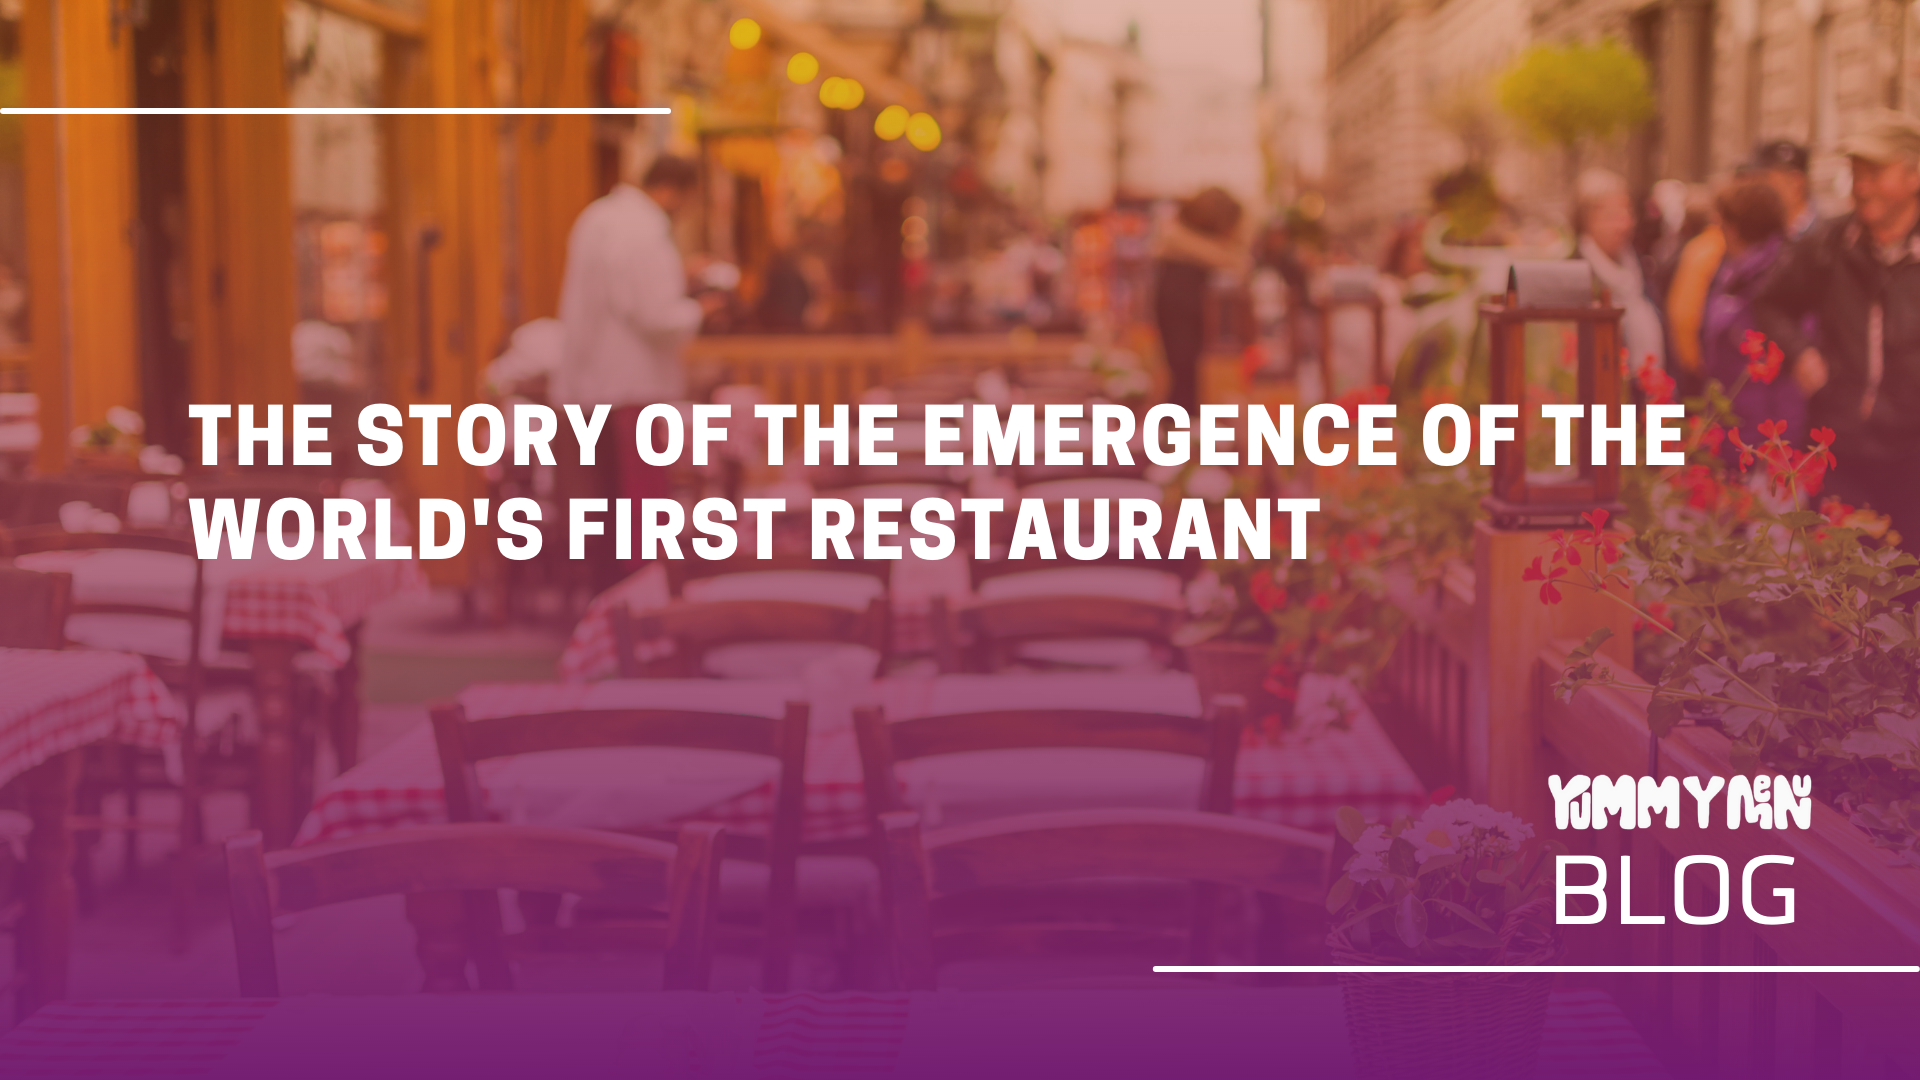 The Story of the Emergence of the World's First Restaurant